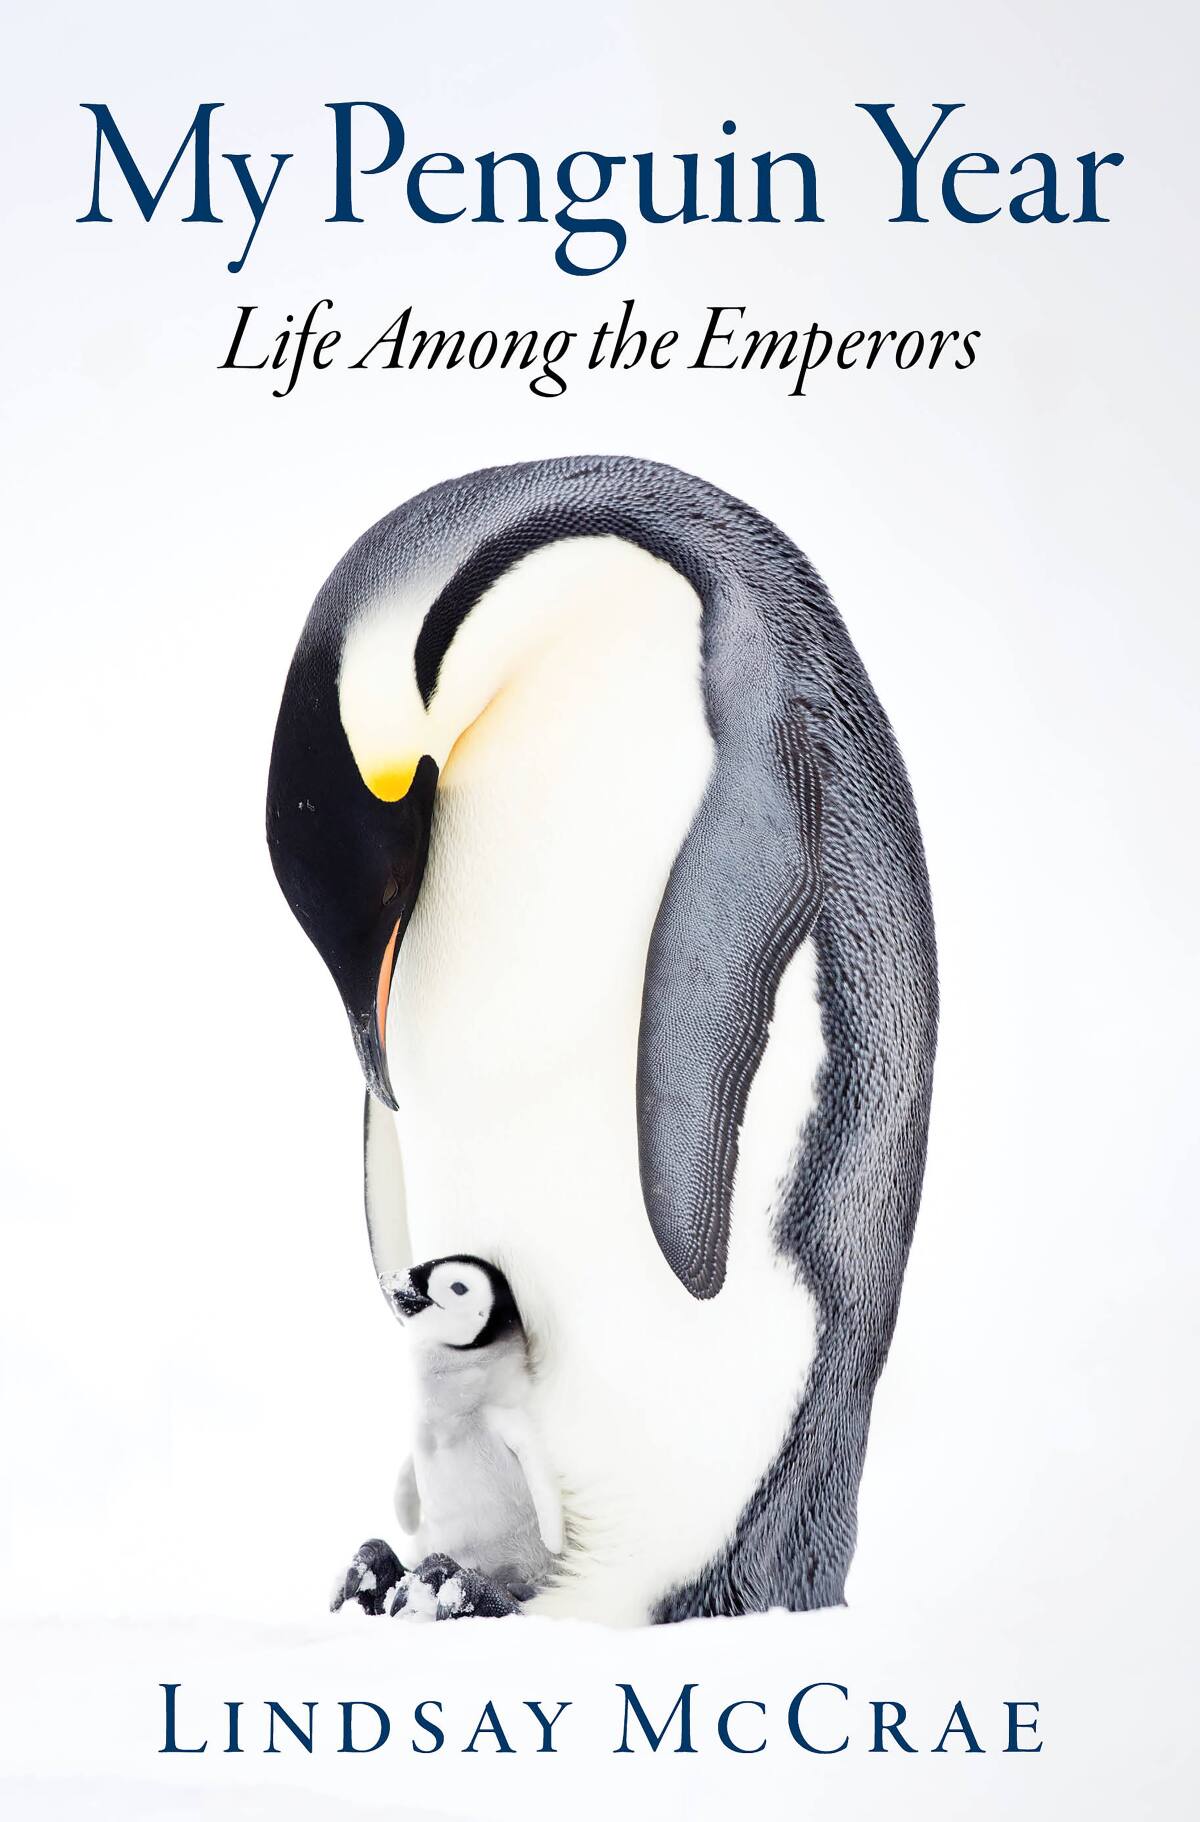 A book jacket for "My Penguin Year: Life Among the Emperors." 